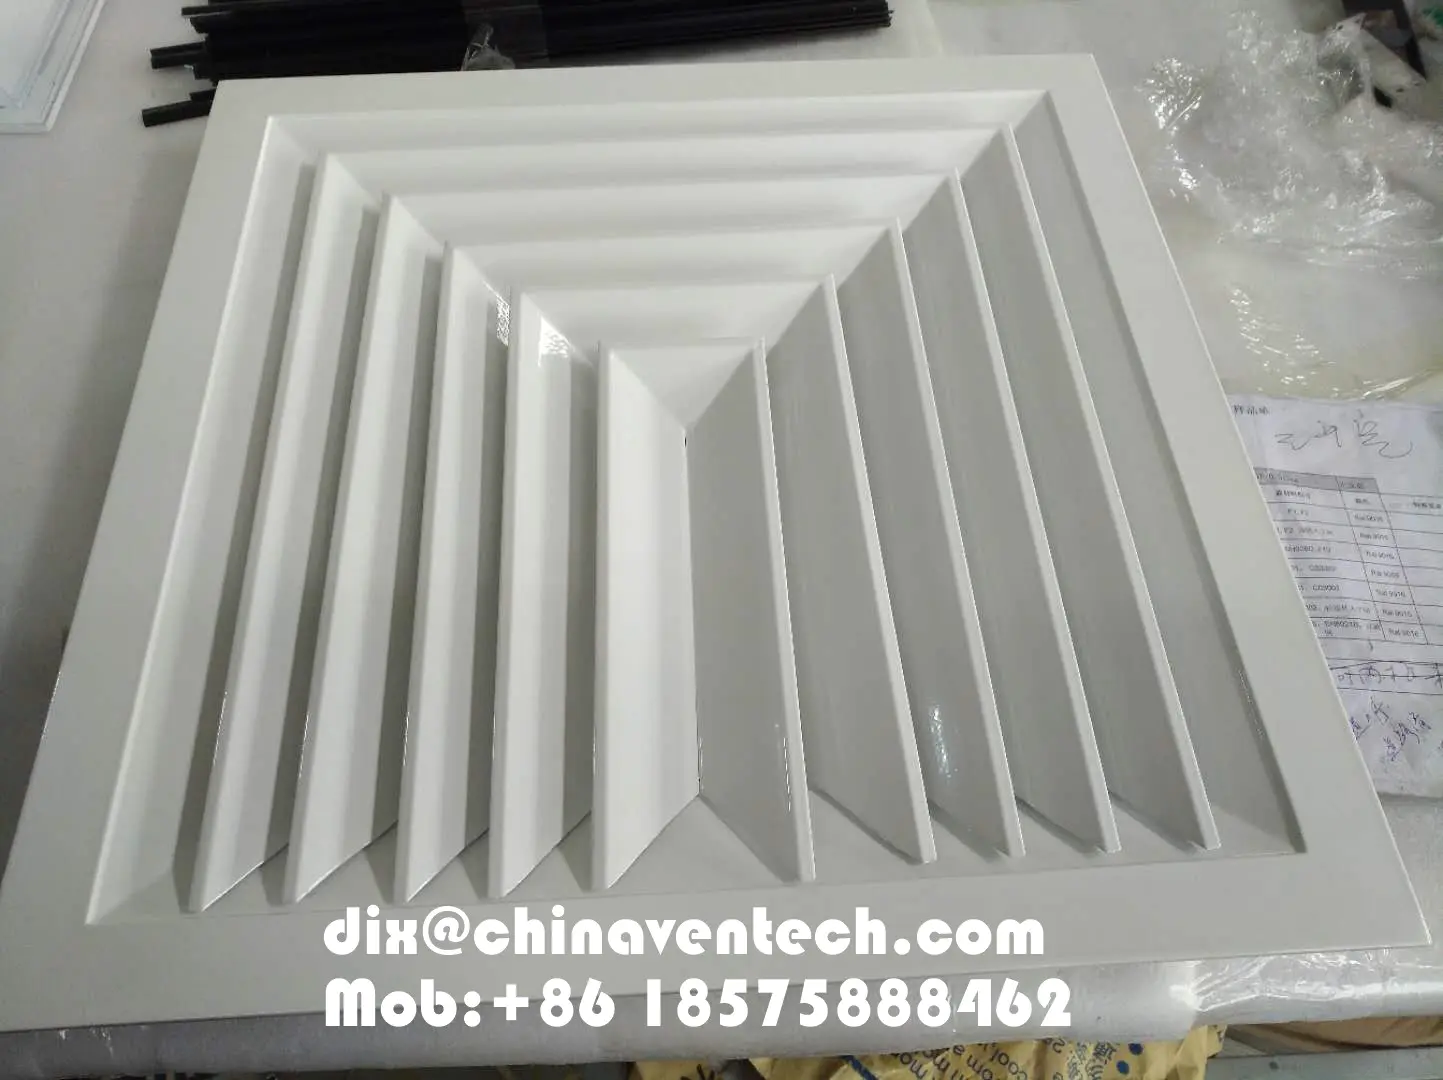 HVAC ventilation duct working ceiling 4 way square air diffuser